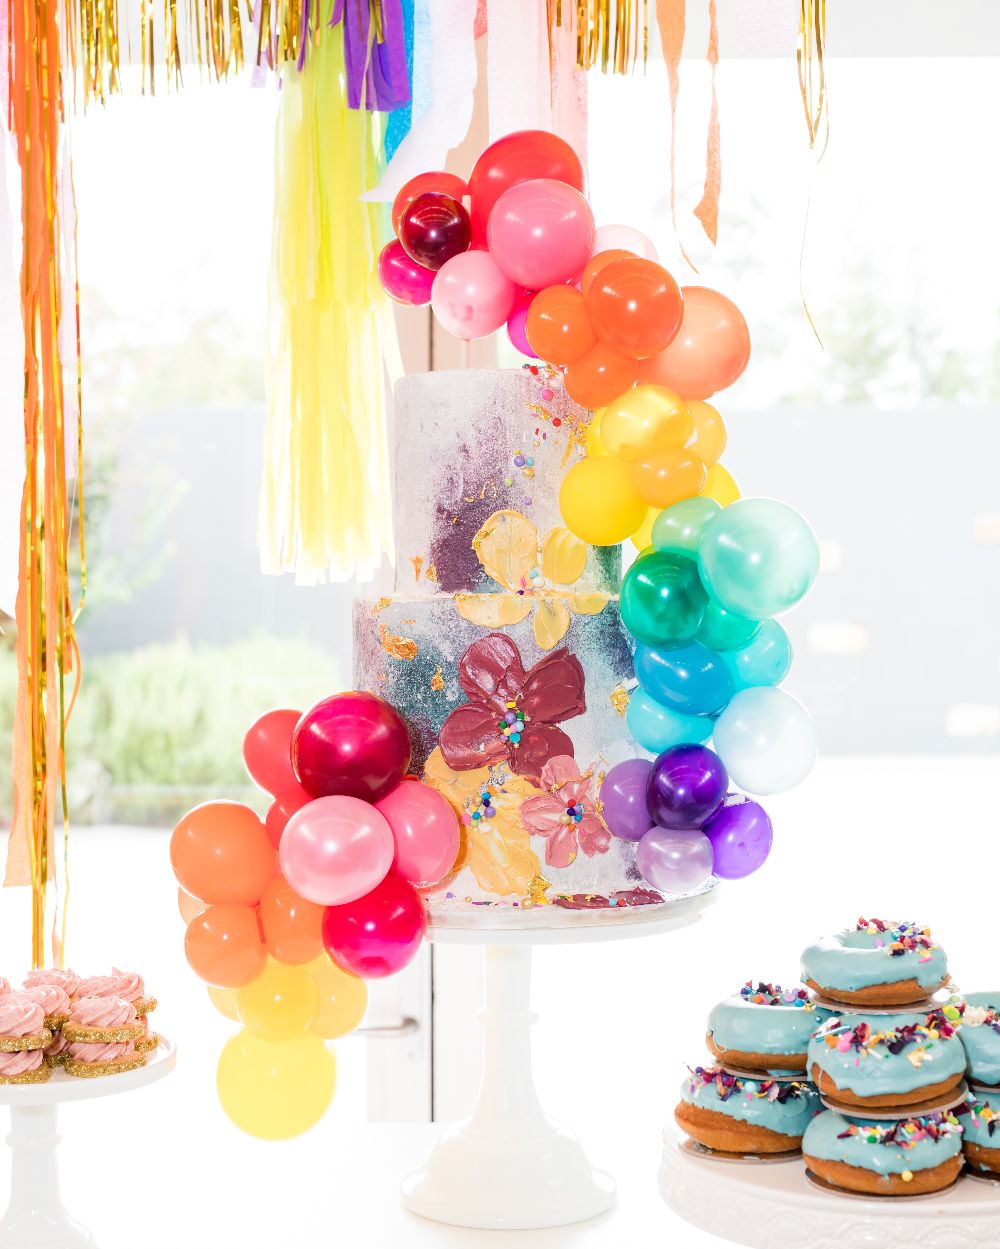 Rainbow Unicorn cake inspiration by the very best Sweet Bloom Cakes